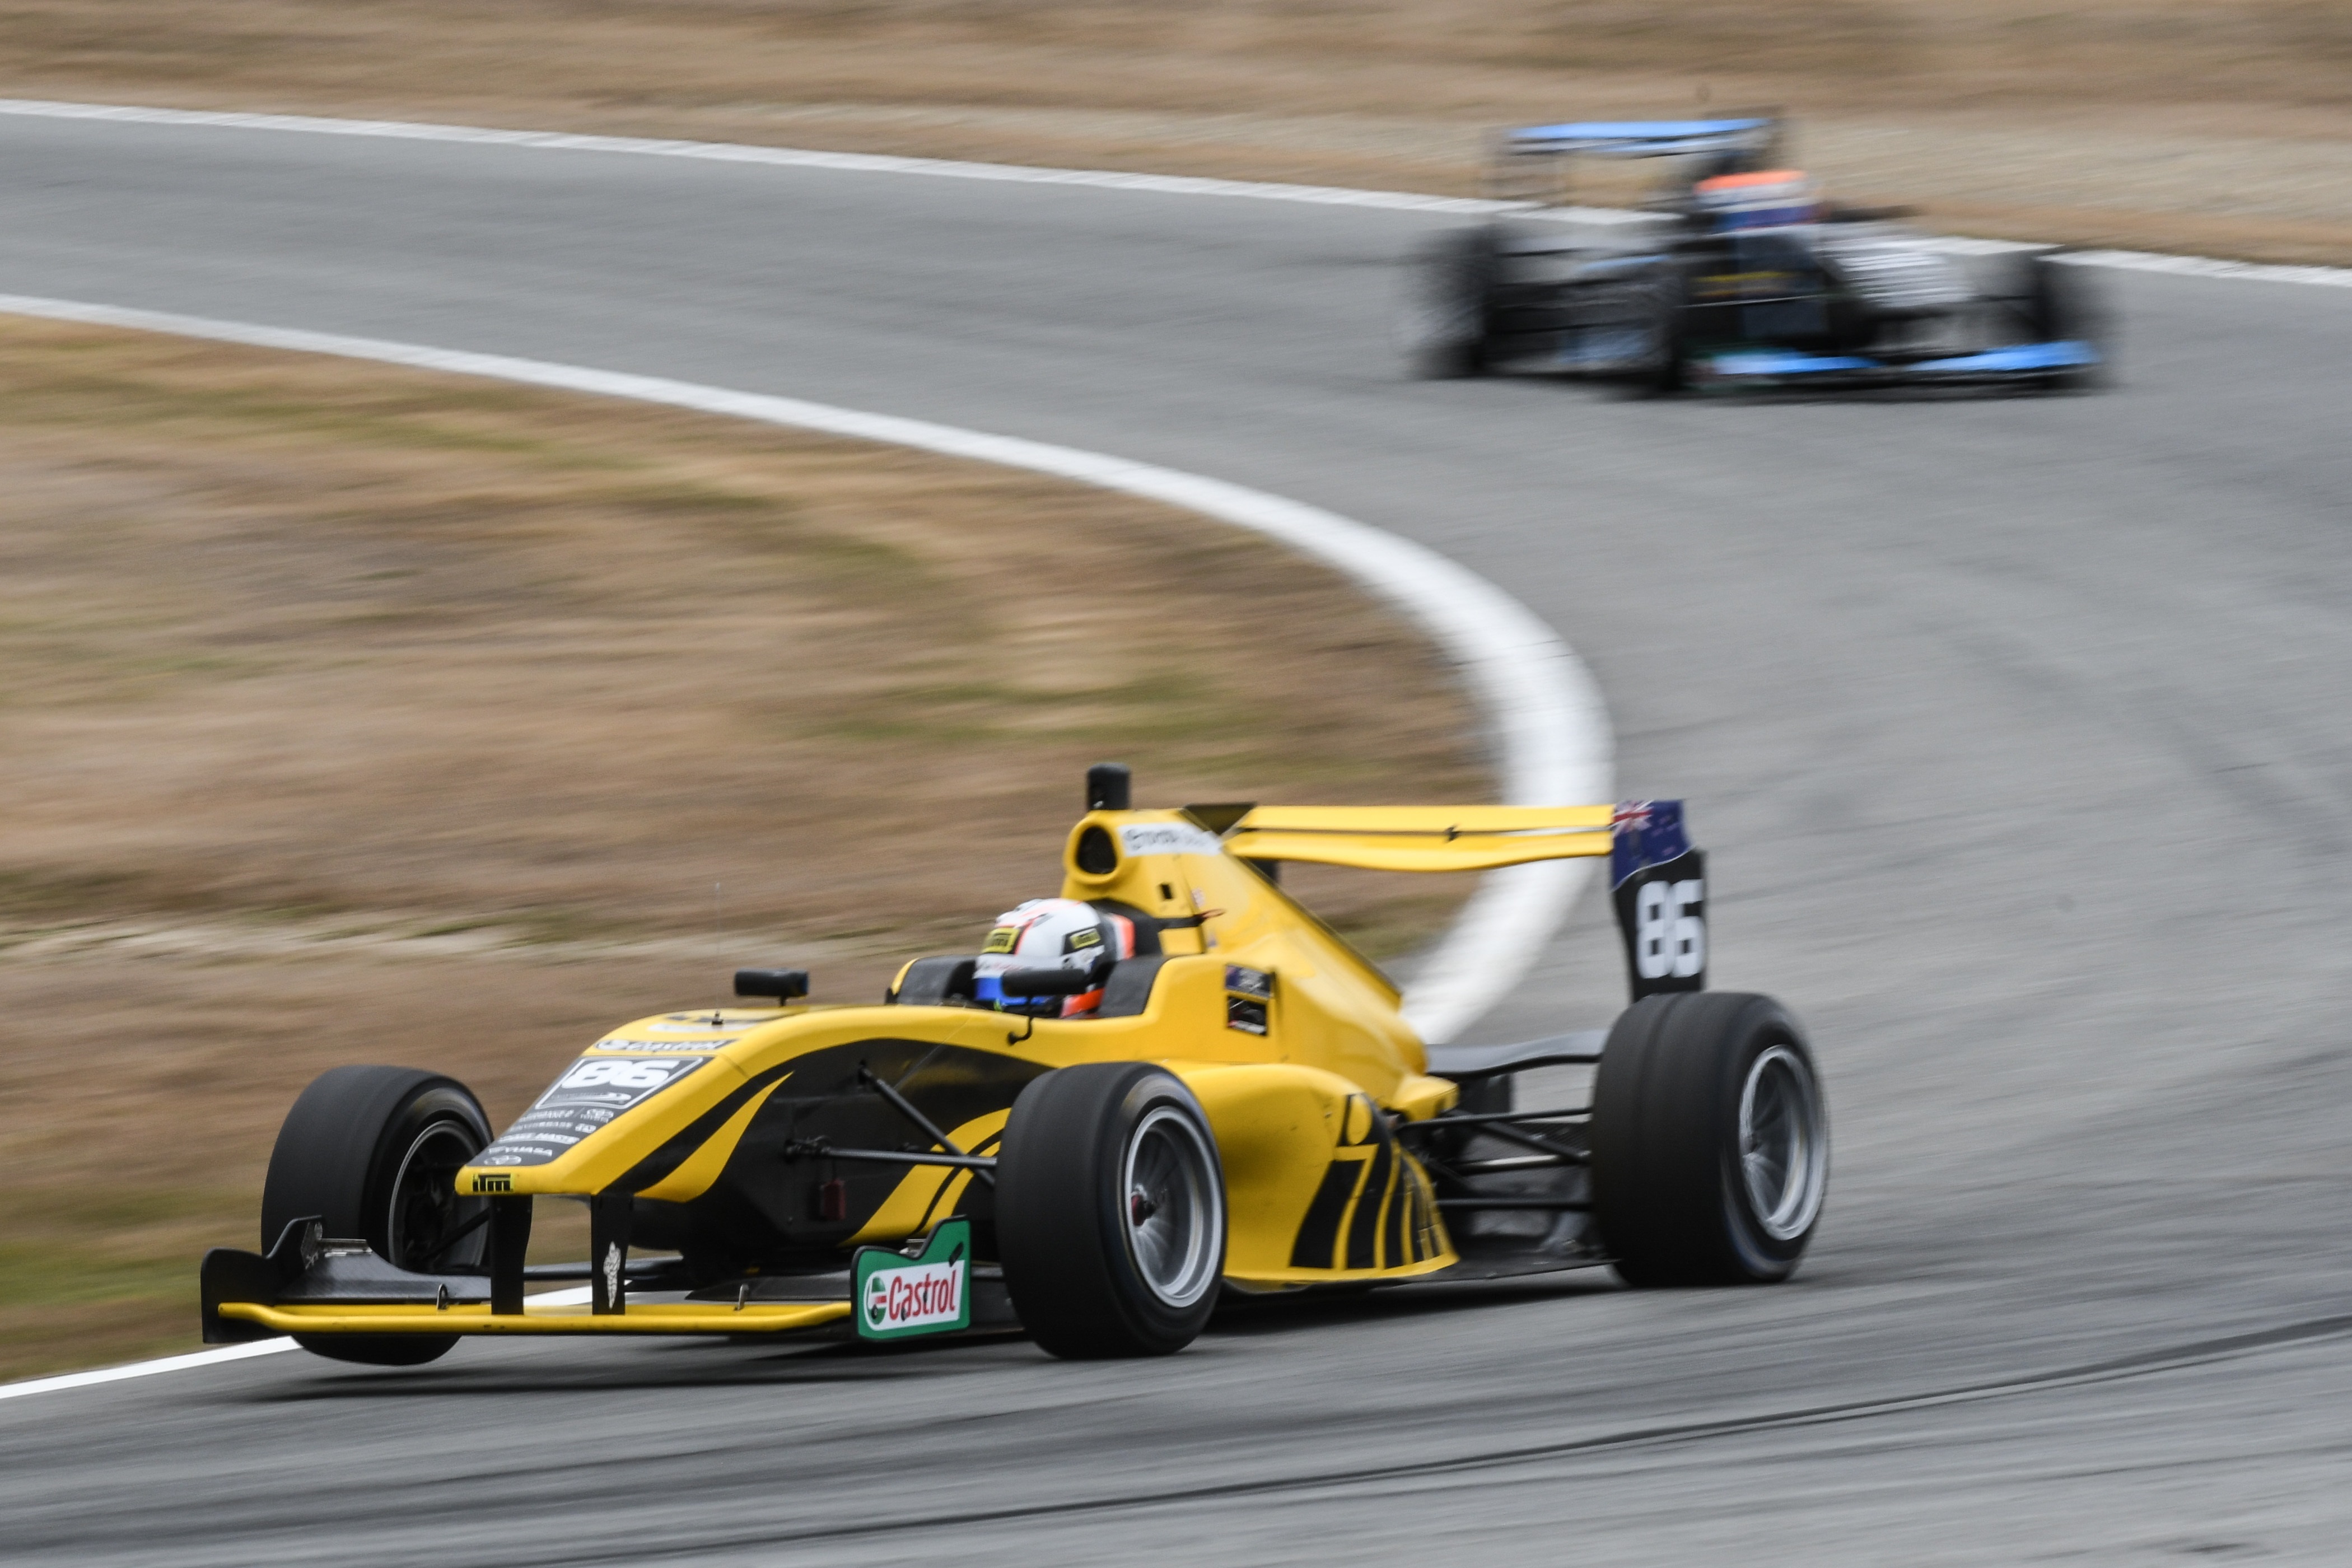 Leitch seeking redemption as TRS hits Teretonga